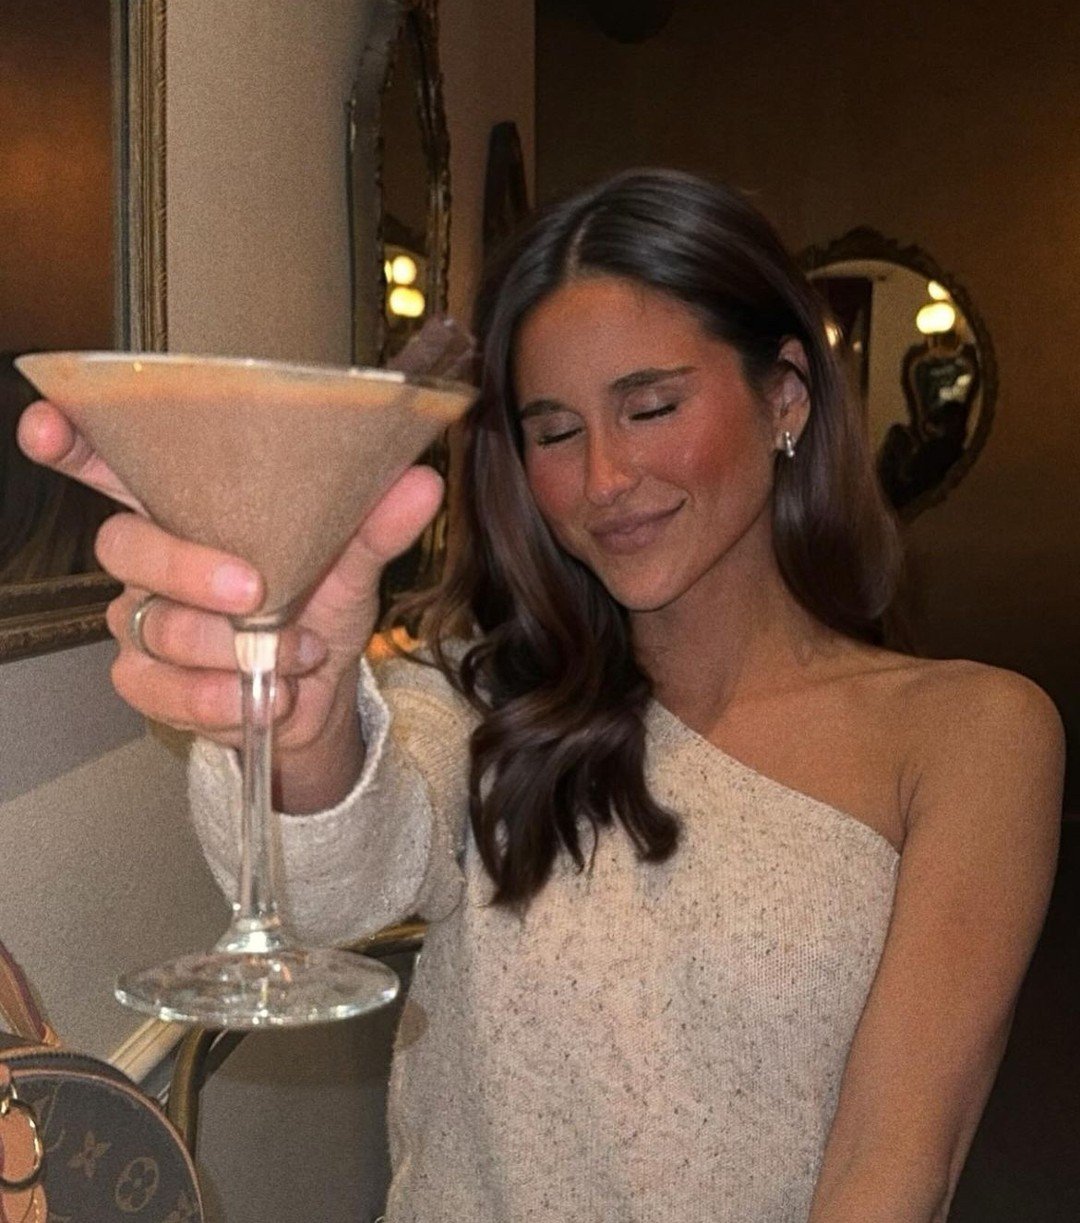 That #AlmostFriday feeling hits different when you have a Baileys' Chocolate Bar Martini in your hand 🤩

Open from 5pm-10pm tonight!
📸: @rileyrcalloway